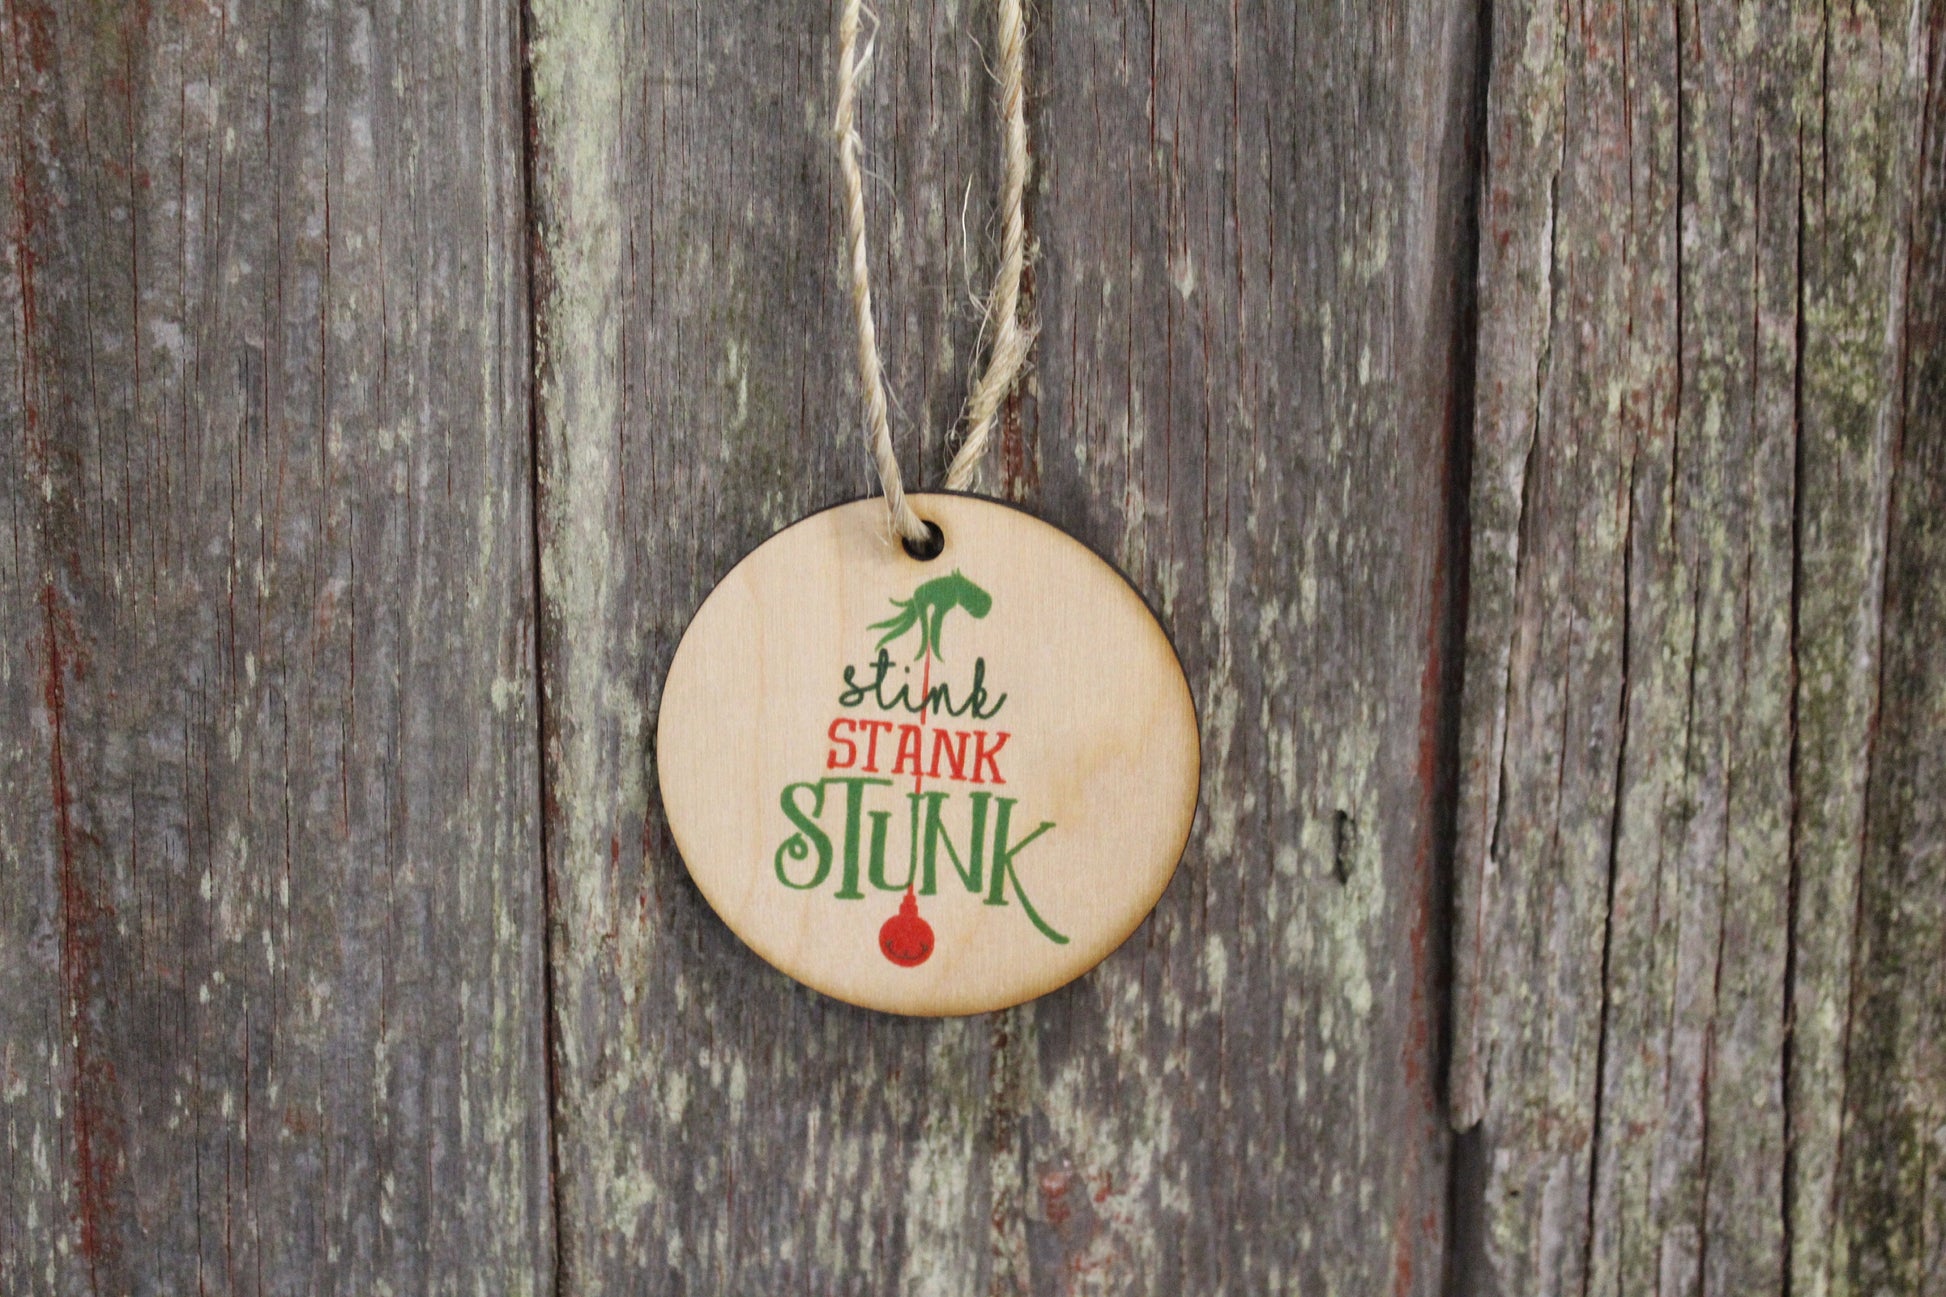 Stink Stank Stunk Ornament Grinch Christmas Keychain Décor Wood Sign Tree Gift Cute Whoville Hand Green Festive